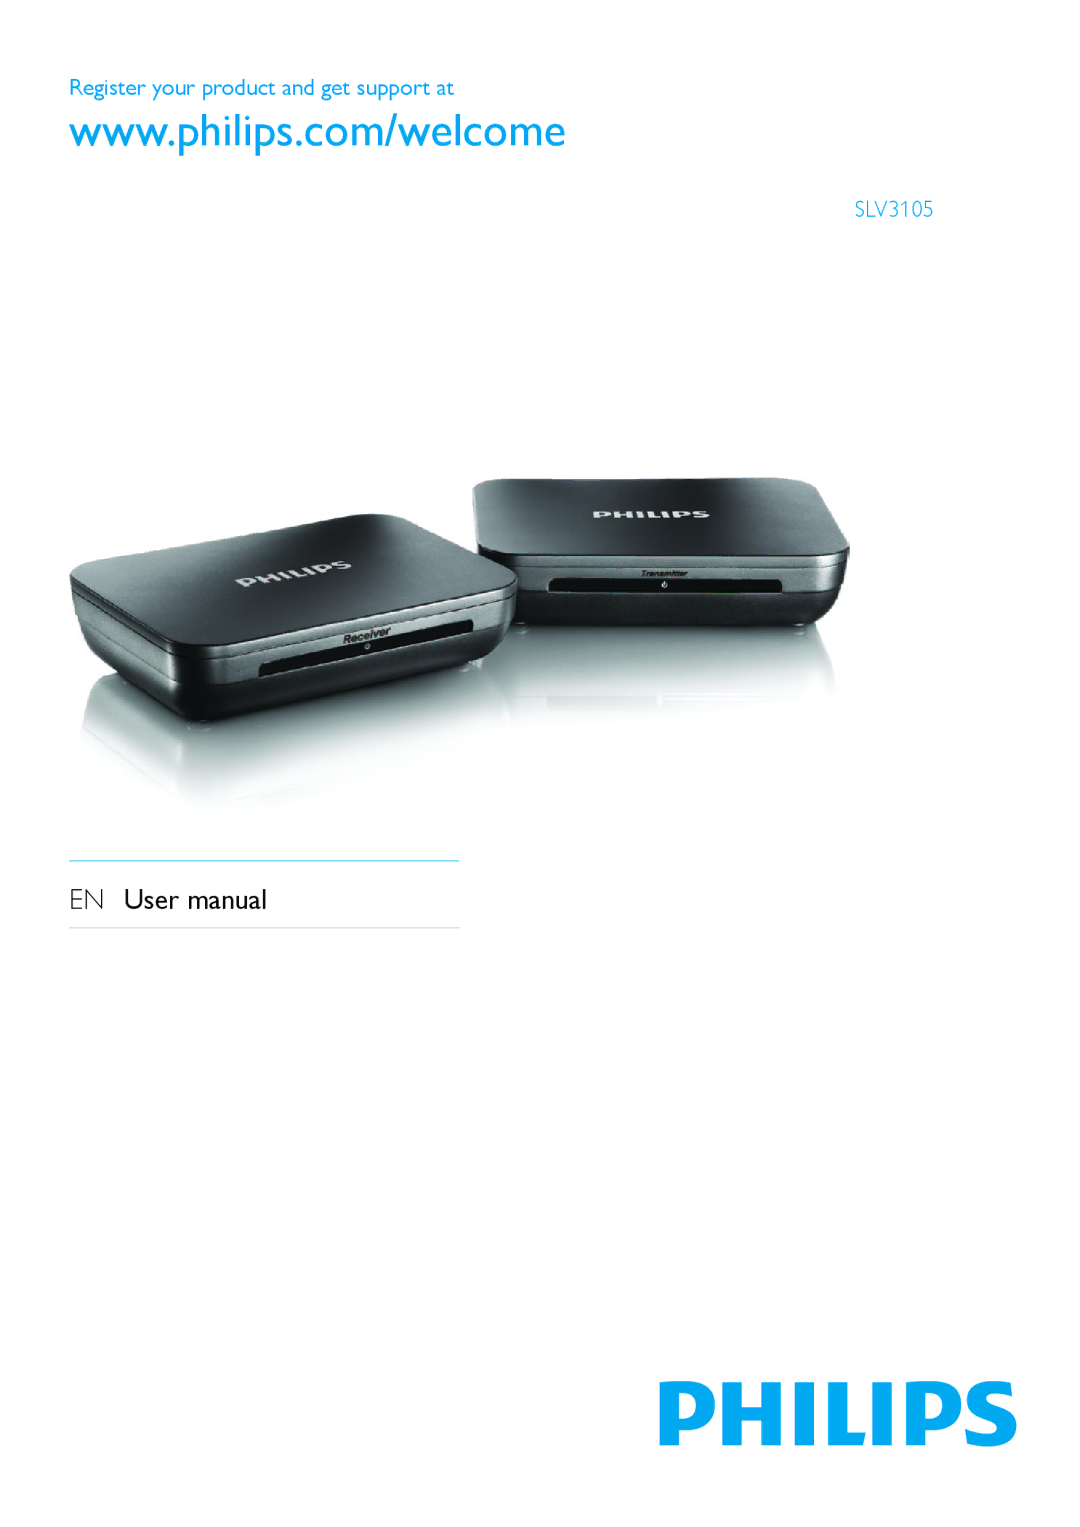 Philips user manual Register your product and get support at SLV3105 